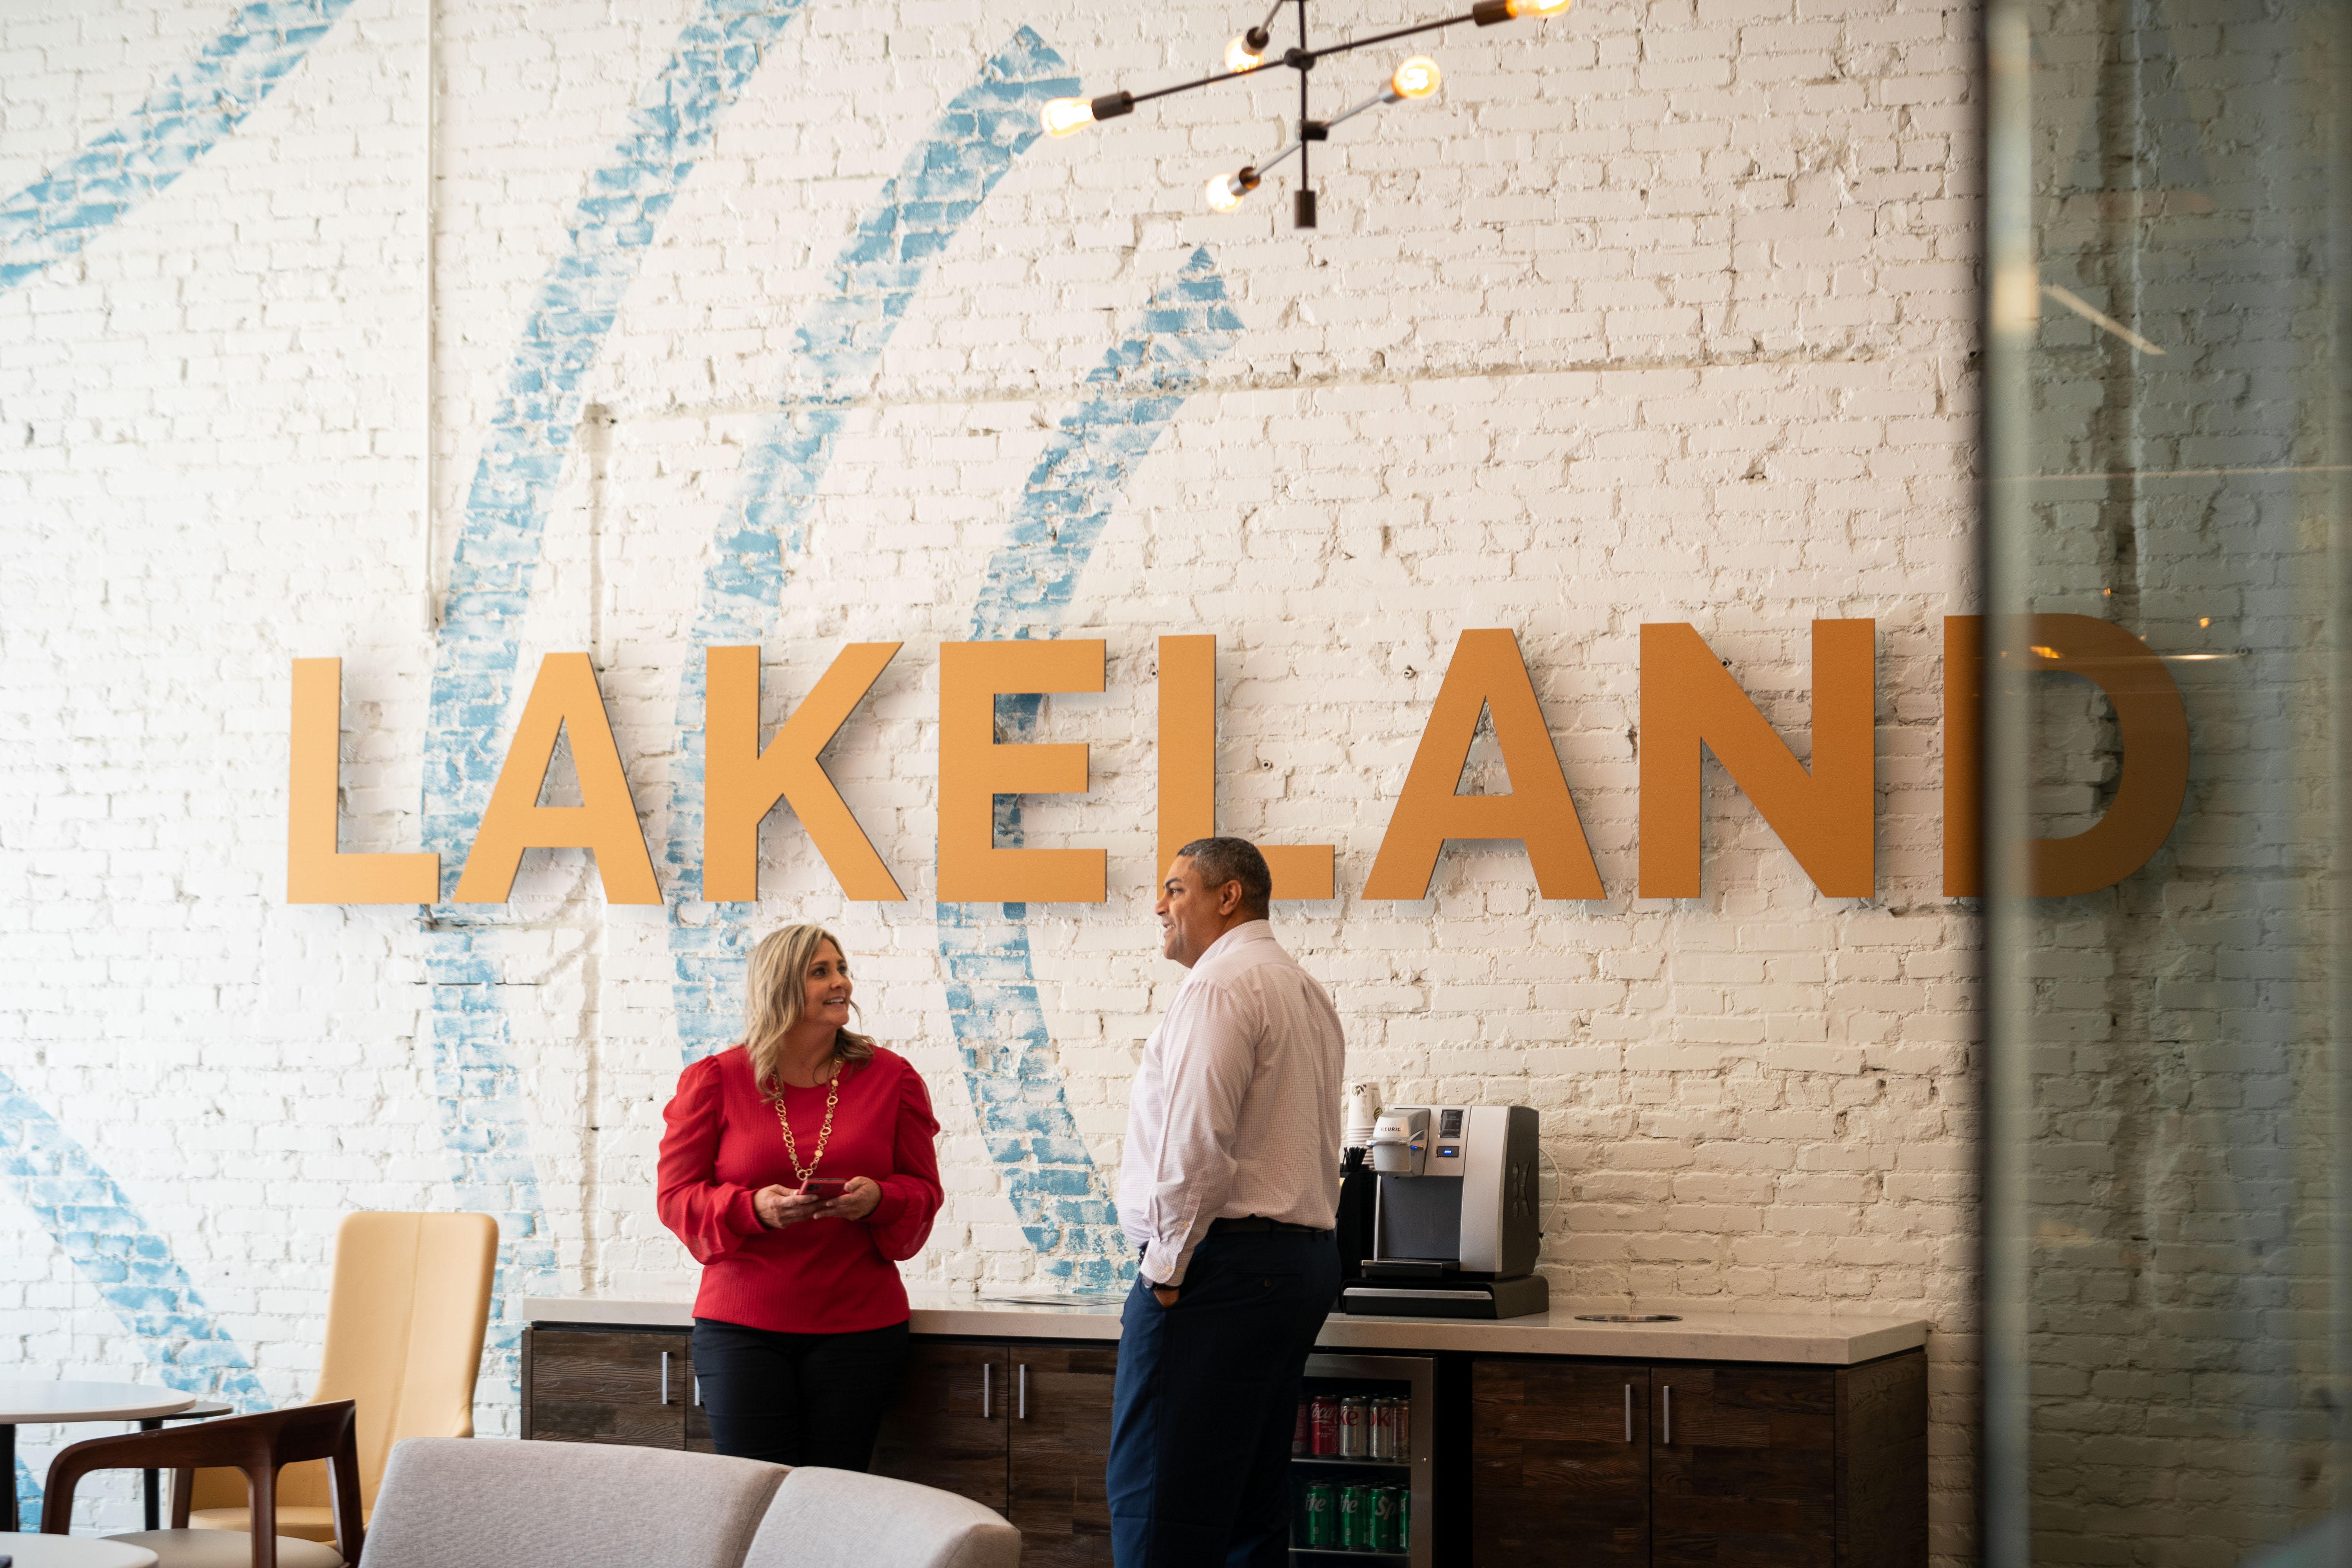 Young White woman in a red top and Hispanic gentleman standing in front of a coffee station in front of a white painted brick wall with the word LAKELAND in yellow letters, in a Crews Bank & Trust, having a discussion